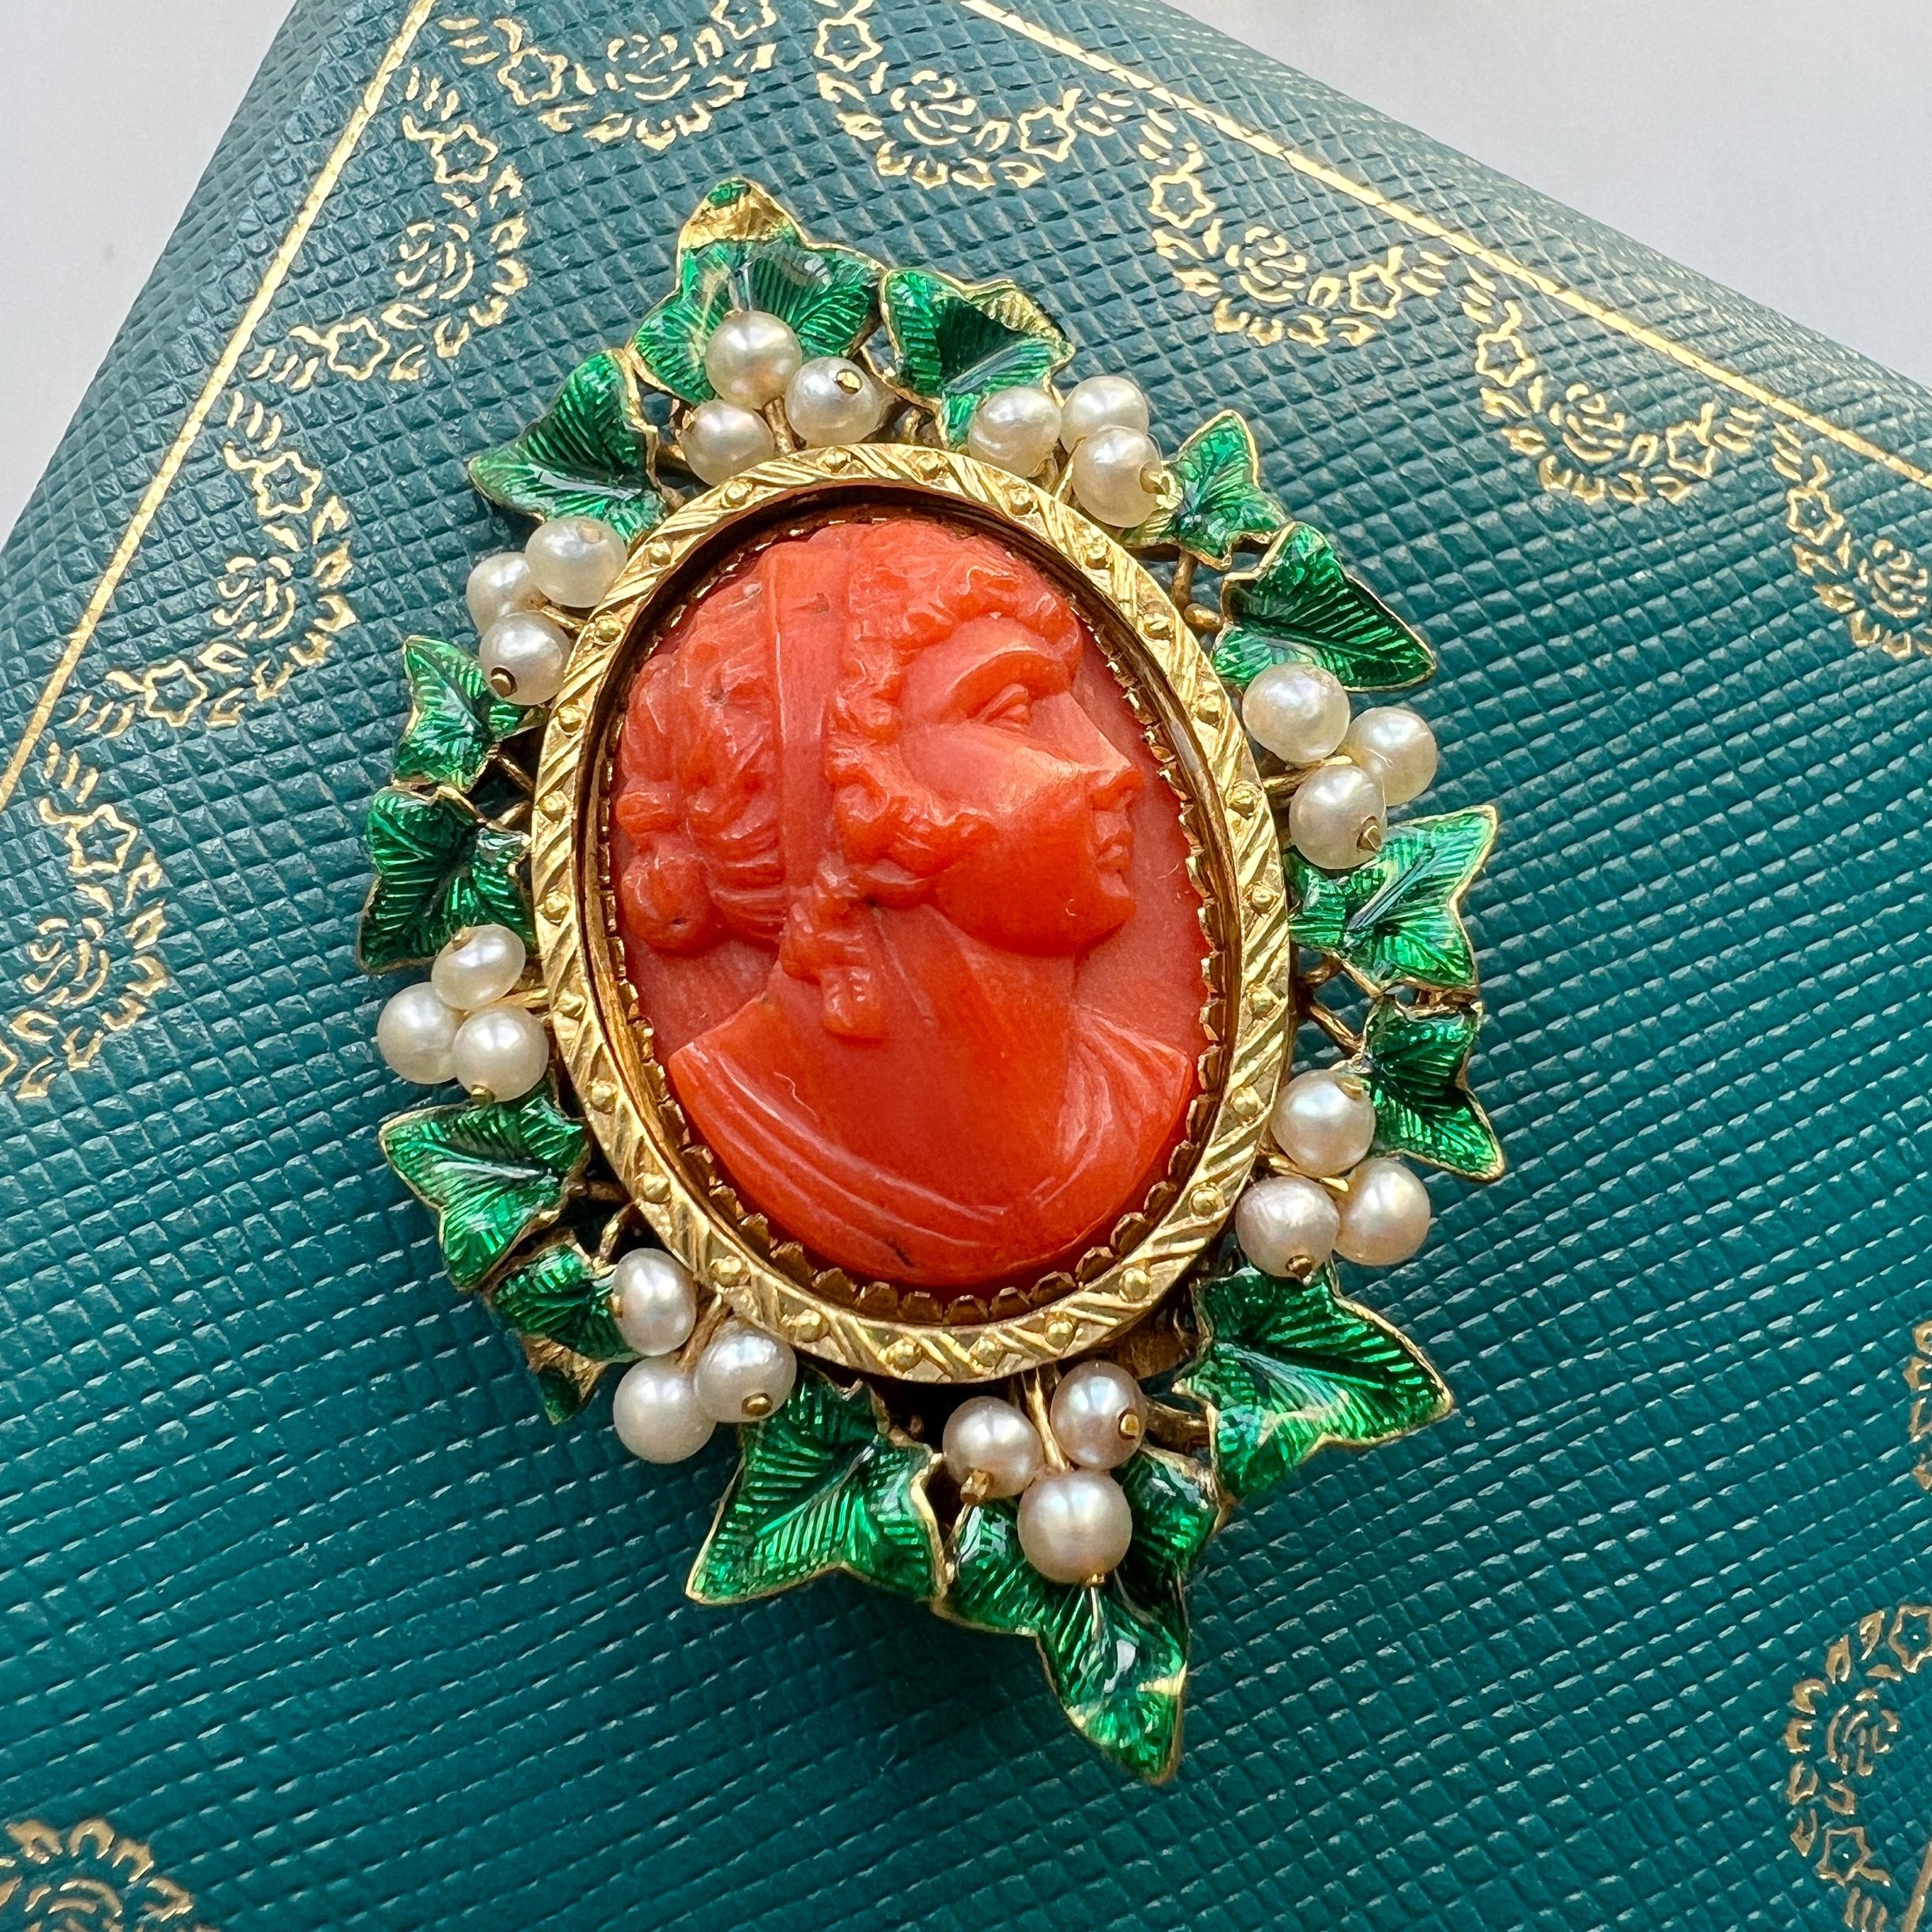 For sale a rare red coral cameo brooch mounted in 18K yellow gold, crafted during the Victorian era, circa 1850s. This exquisite brooch is a true testament to the artistry of a bygone era, boasting a design that captivates the heart and